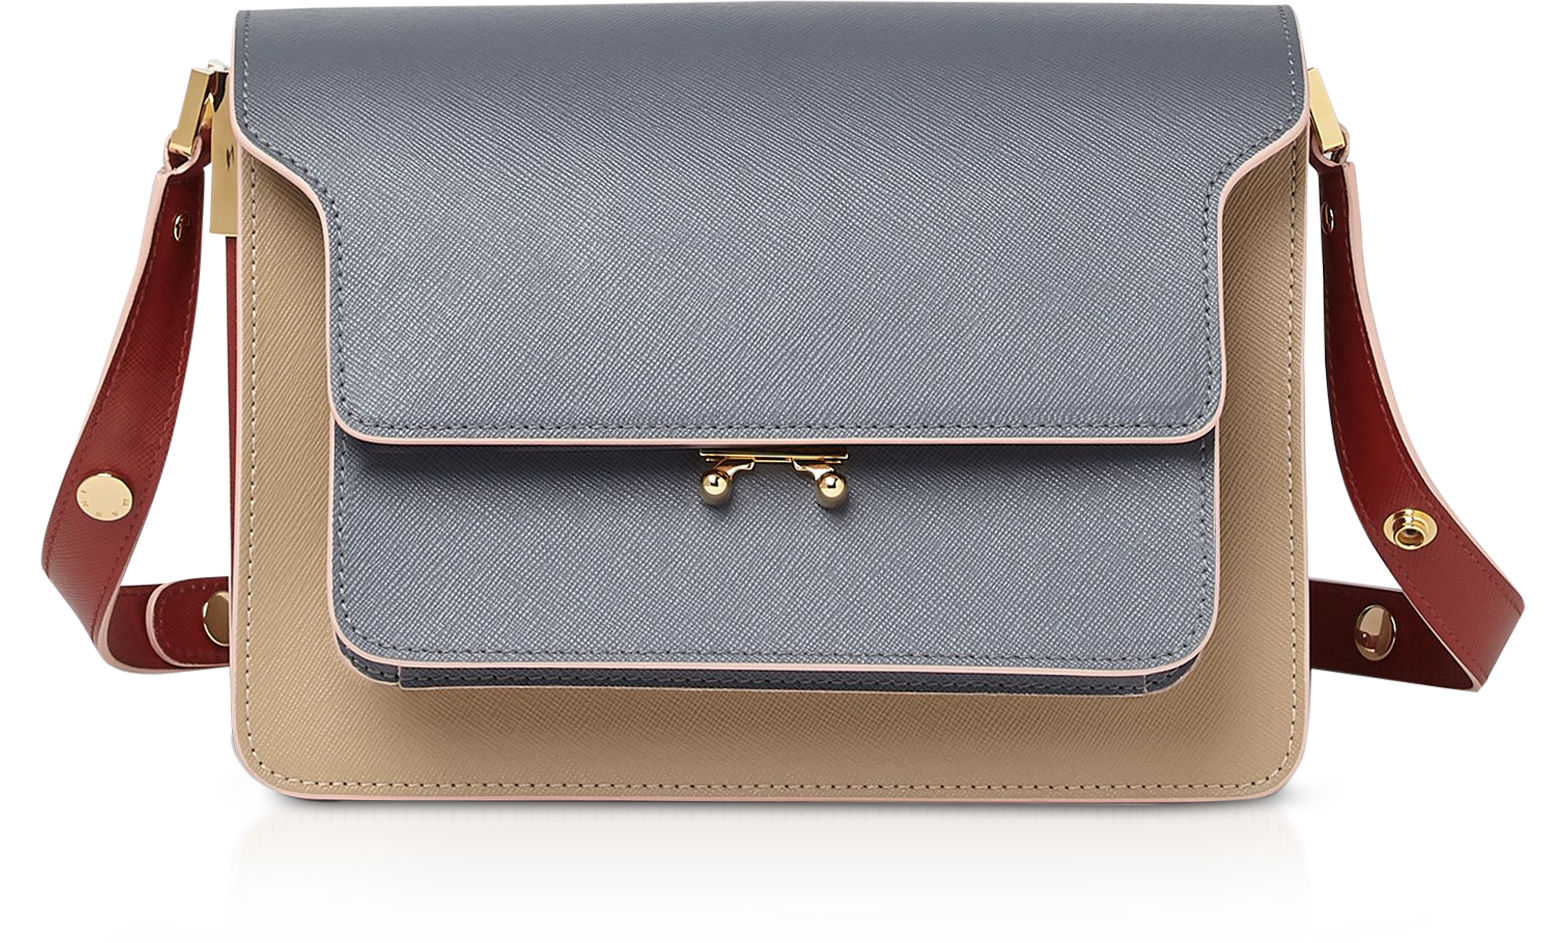 Marni Beige, Red Saffiano Leather Trunk Bag at FORZIERI